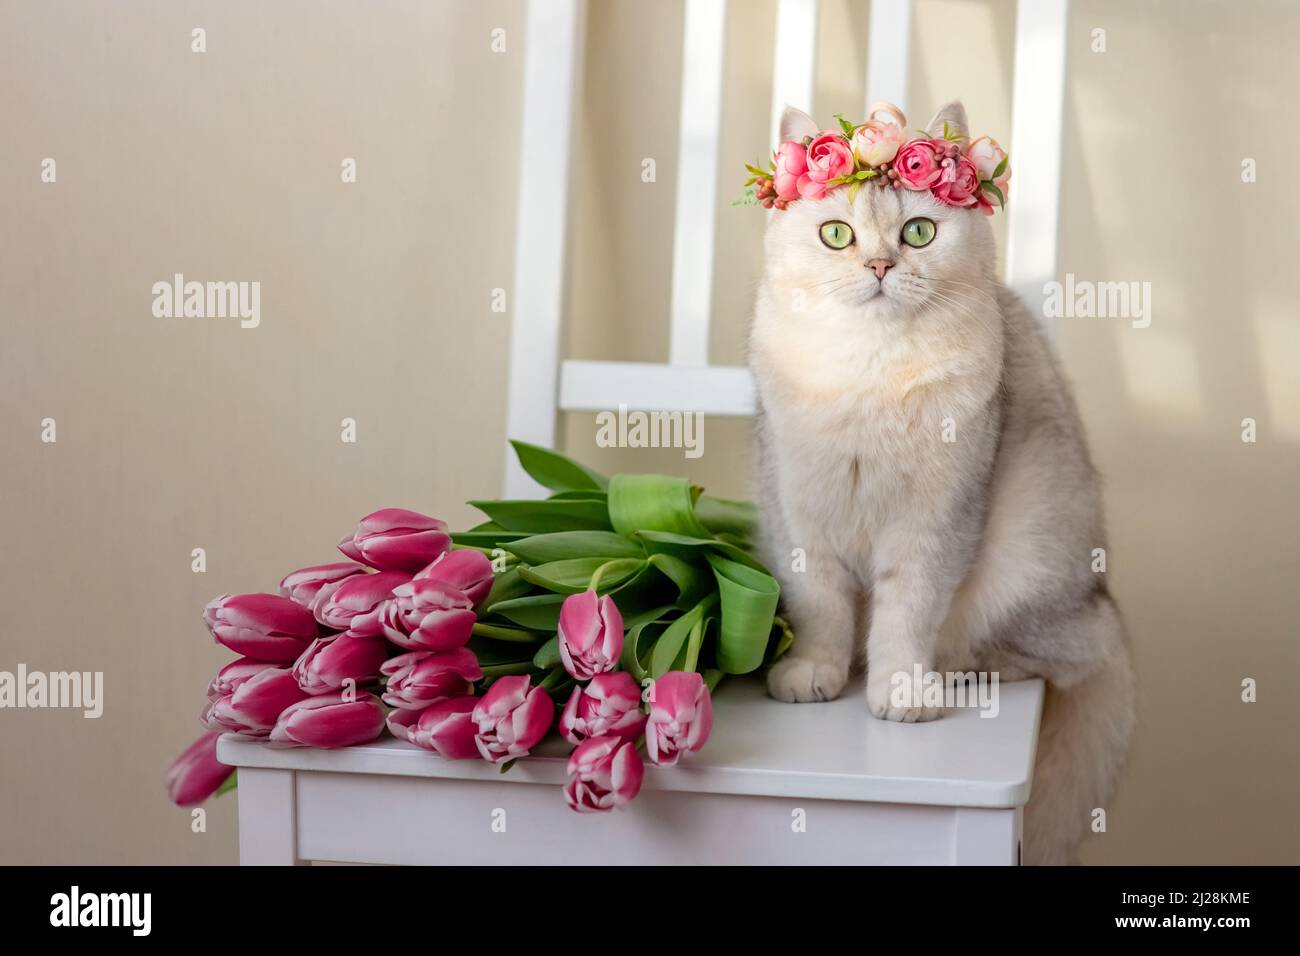 A beautiful white cat in a crown of pink flowers, sits with bouquet of pink tulips, on a light background. Stock Photo